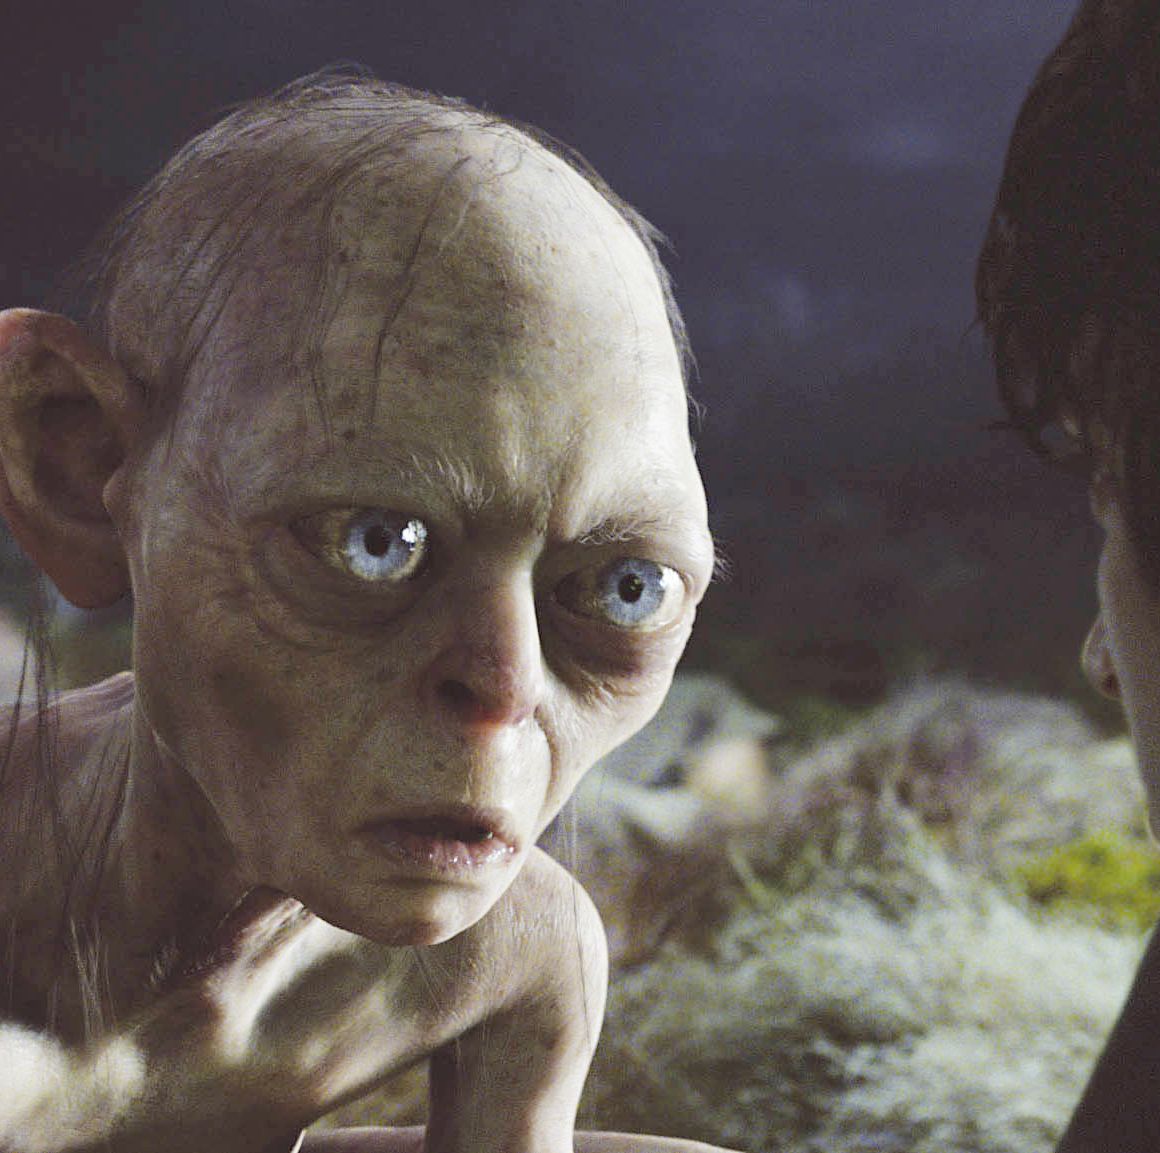 smeagol lord of the rings actor